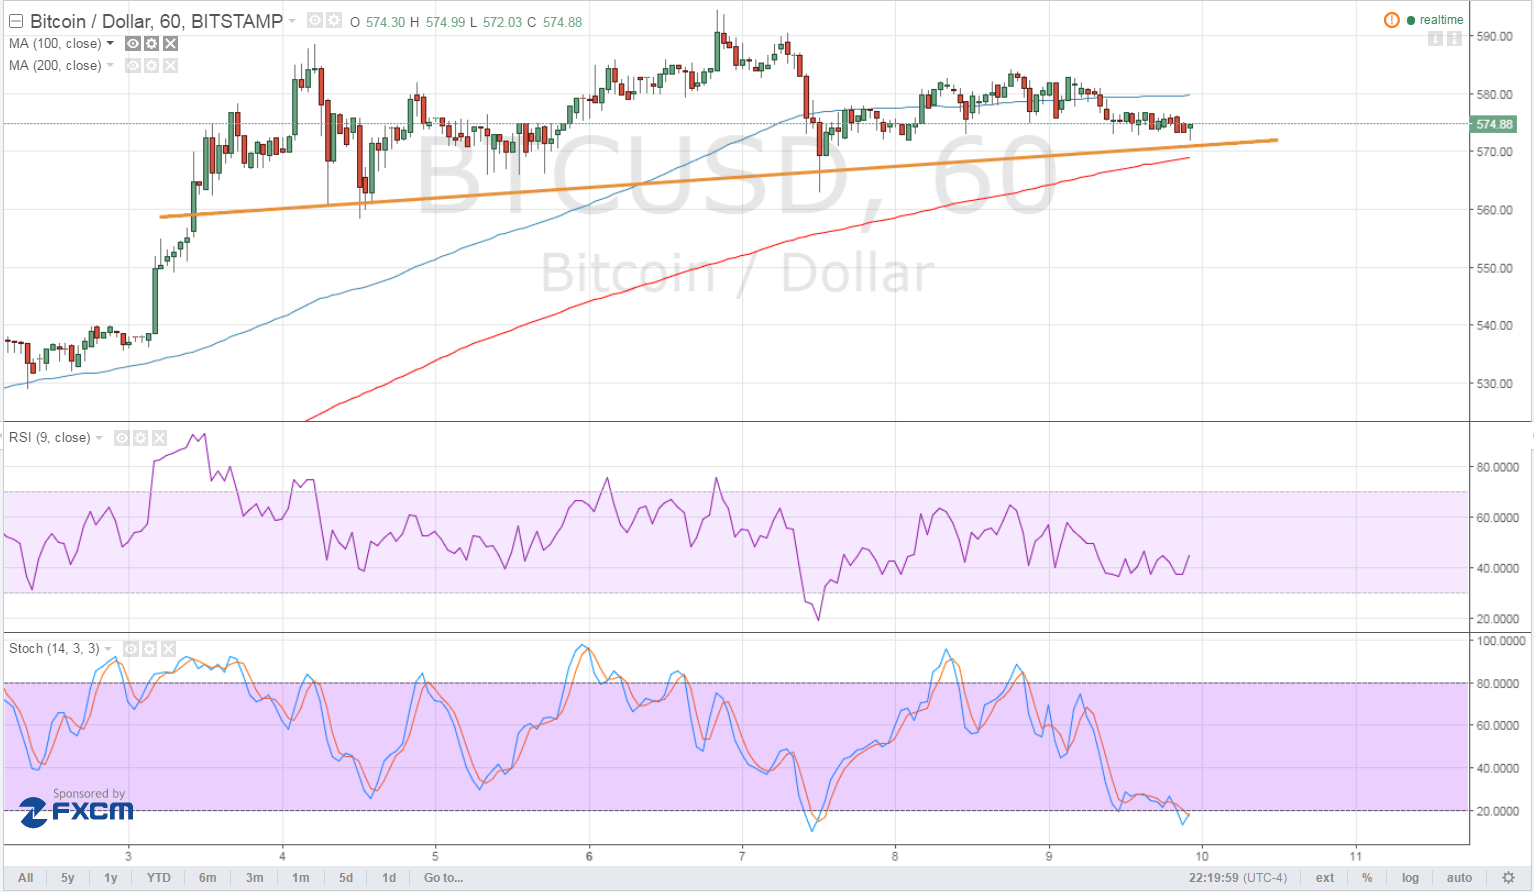 Bitcoin Price Technical Analysis for 06/10/2016 - Head and Shoulders in the Making?